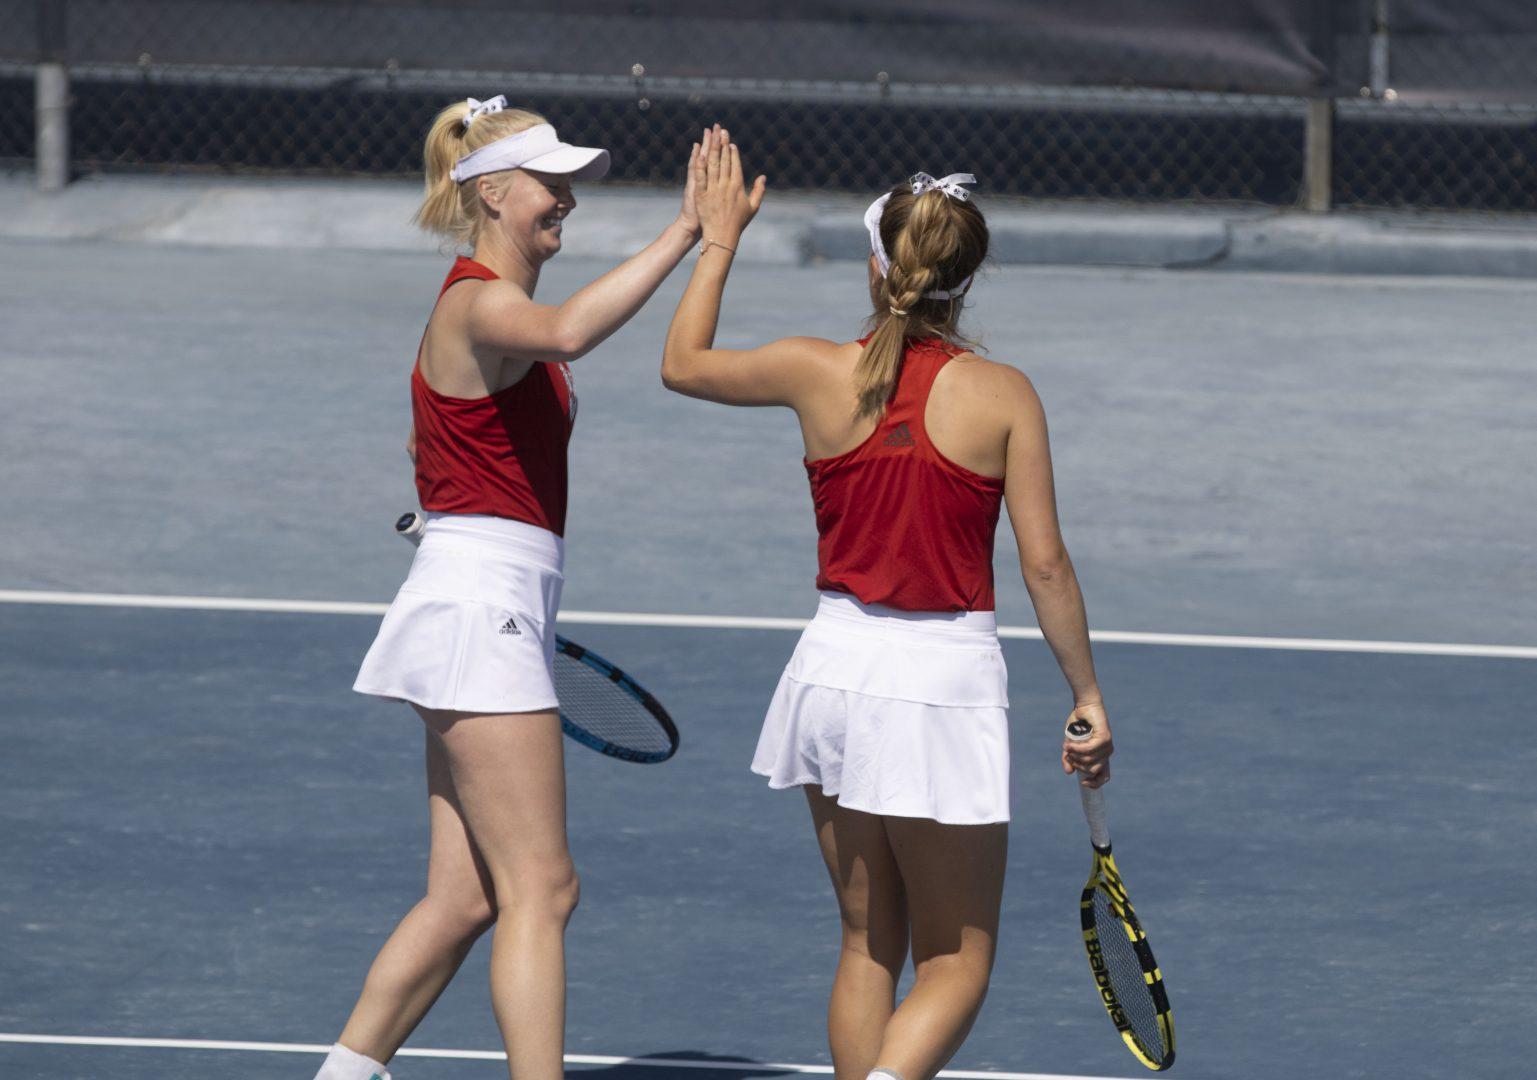 Jane Ellis and A.C. Hummel celebrate a point for their doubles match against Fresno Pacific March 18, 2022 at Spalding G. Wathen Tennis Center. (Anahi Jaramillo / The Collegian)